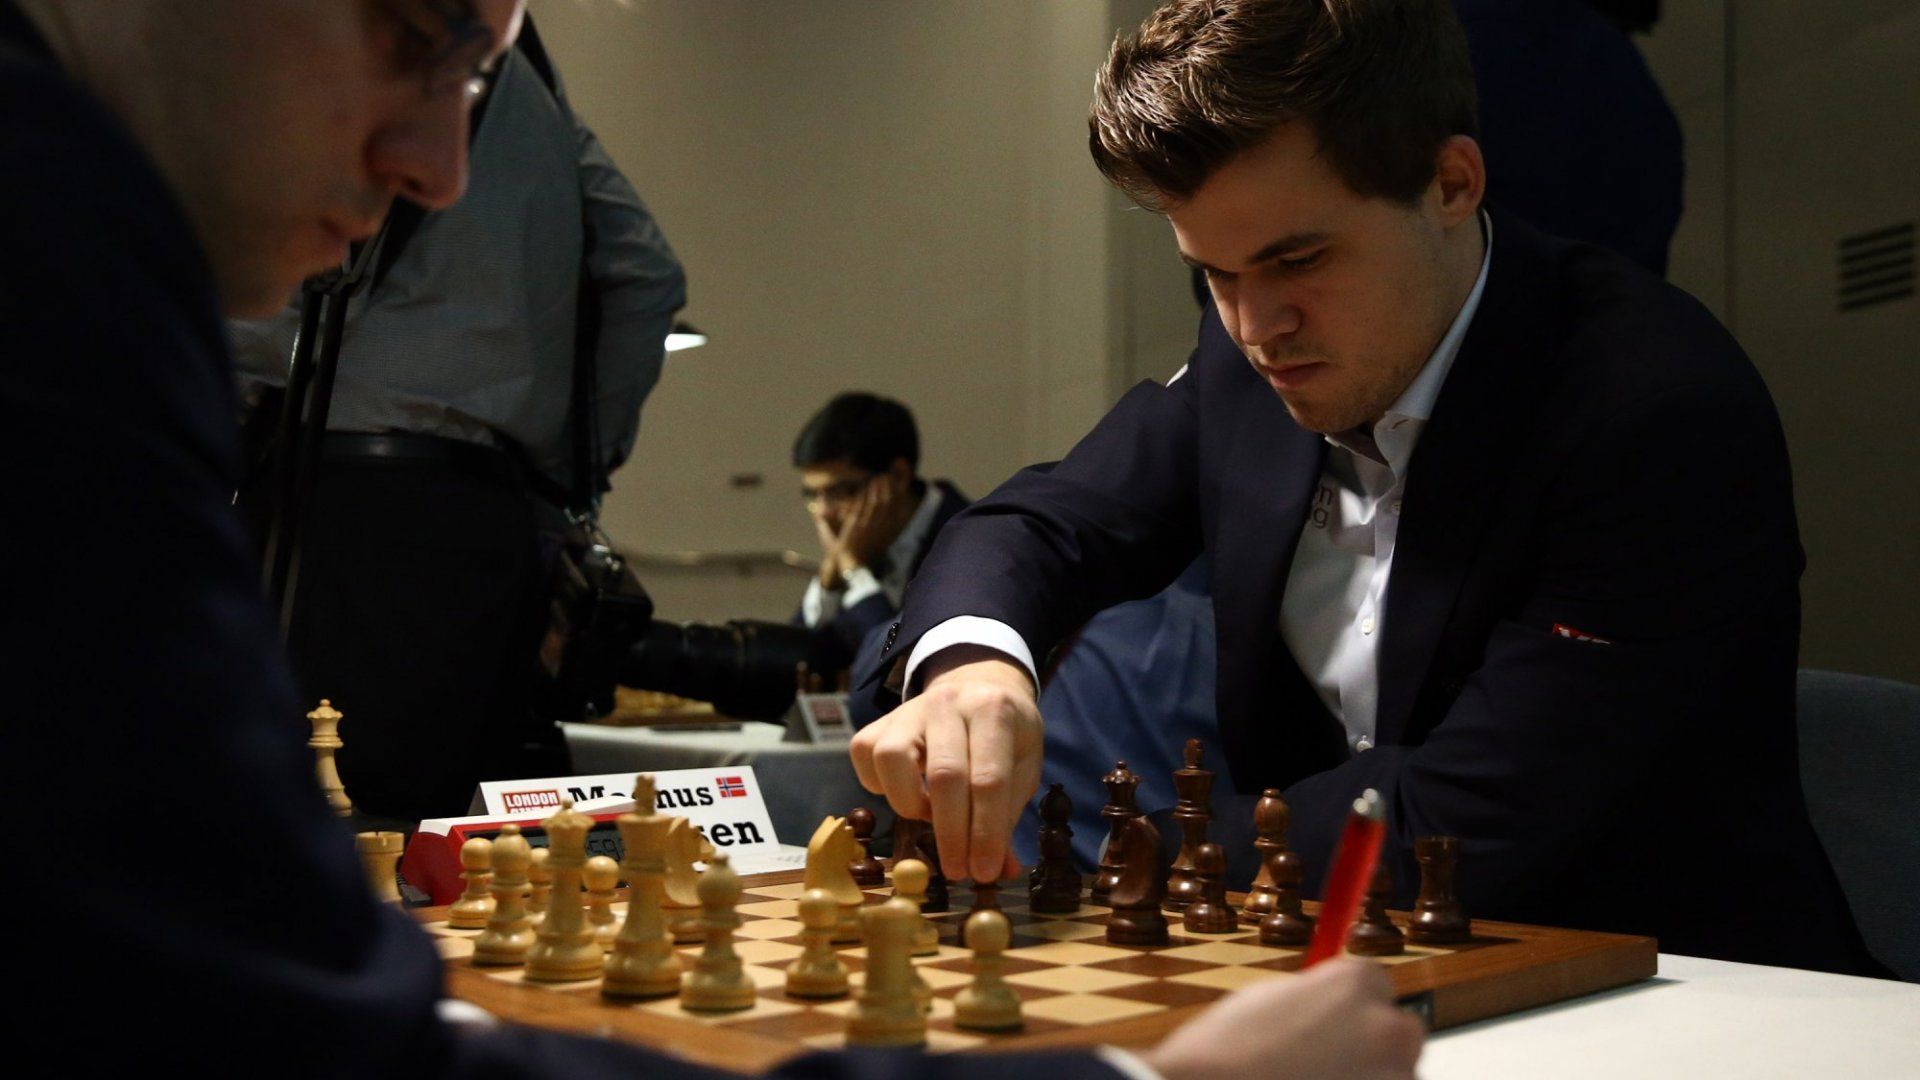 The Best Way to Keep Your Brain Sharp, According to the World's Best Chess Player